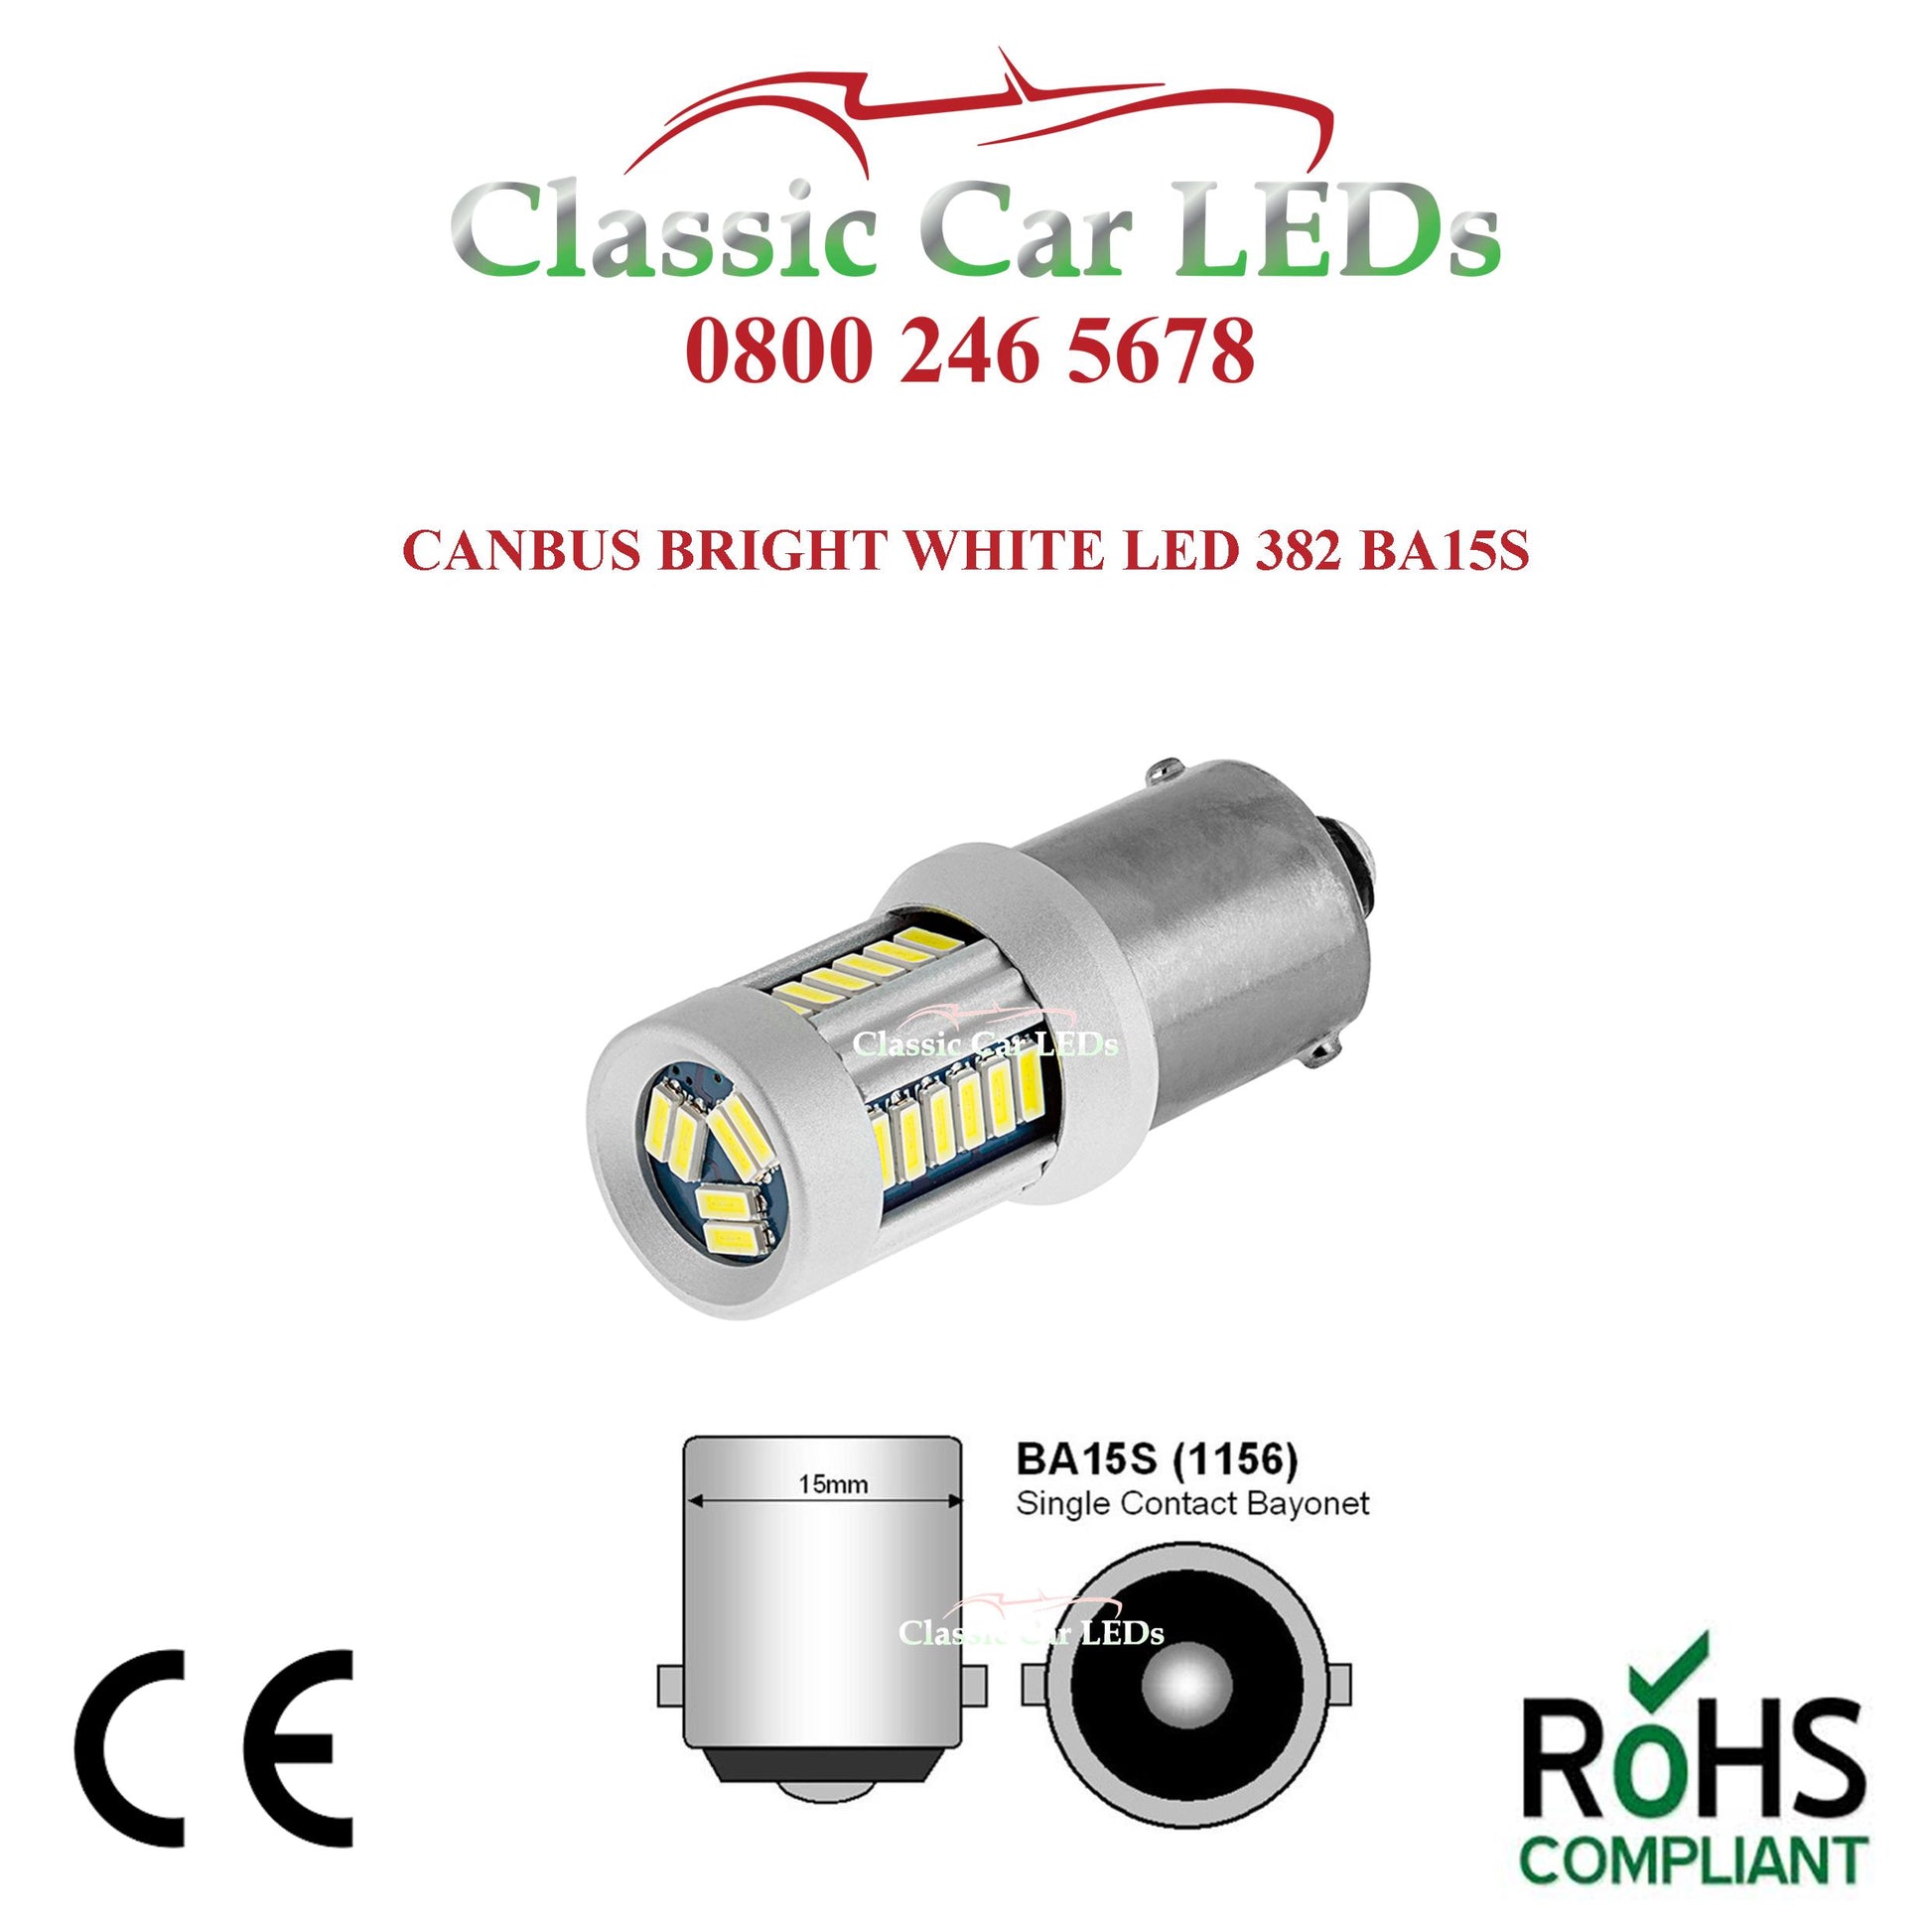 https://www.classiccarleds.co.uk/cdn/shop/products/CANBUS_BRIGHT_WHITE_REVERSE_LIGHT_LED_382_BA15S_4014.jpg?v=1568715817&width=1946